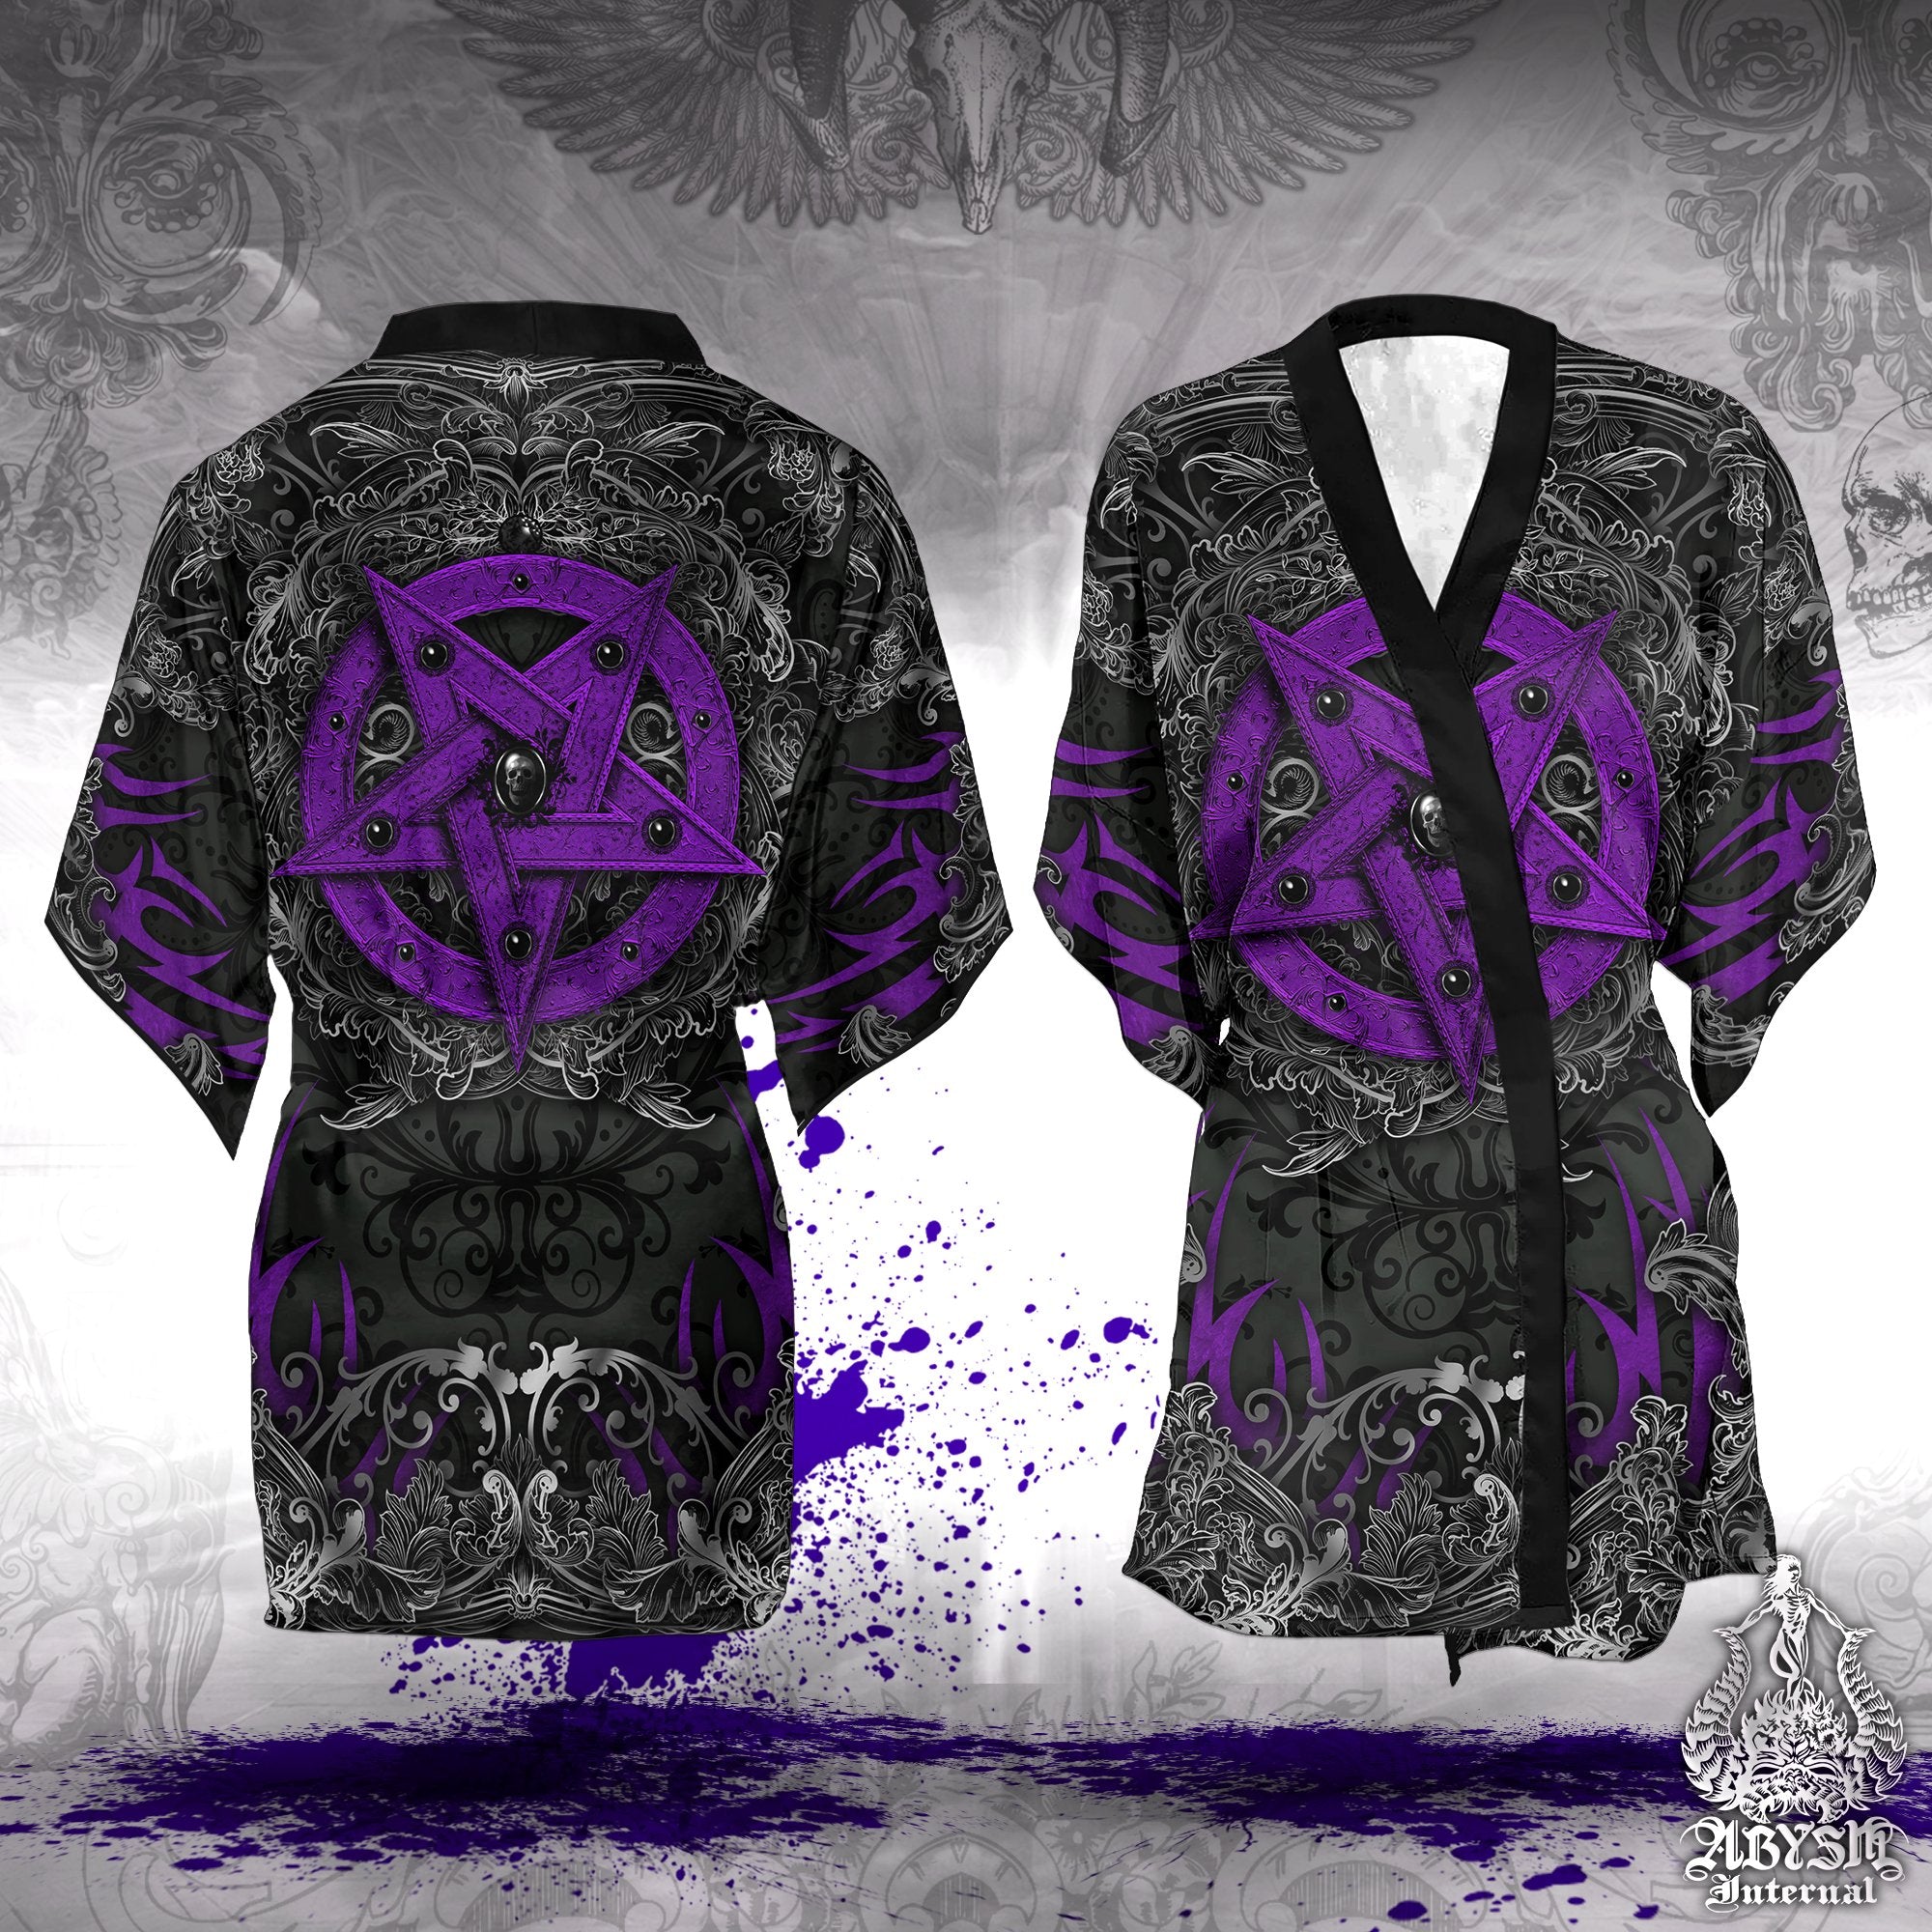 Pentagram Short Kimono Robe, Pastel Goth Beach Party Outfit, Black Purple Coverup, Gothic Witch Summer Festival, Witchy Clothing, Unisex - Abysm Internal